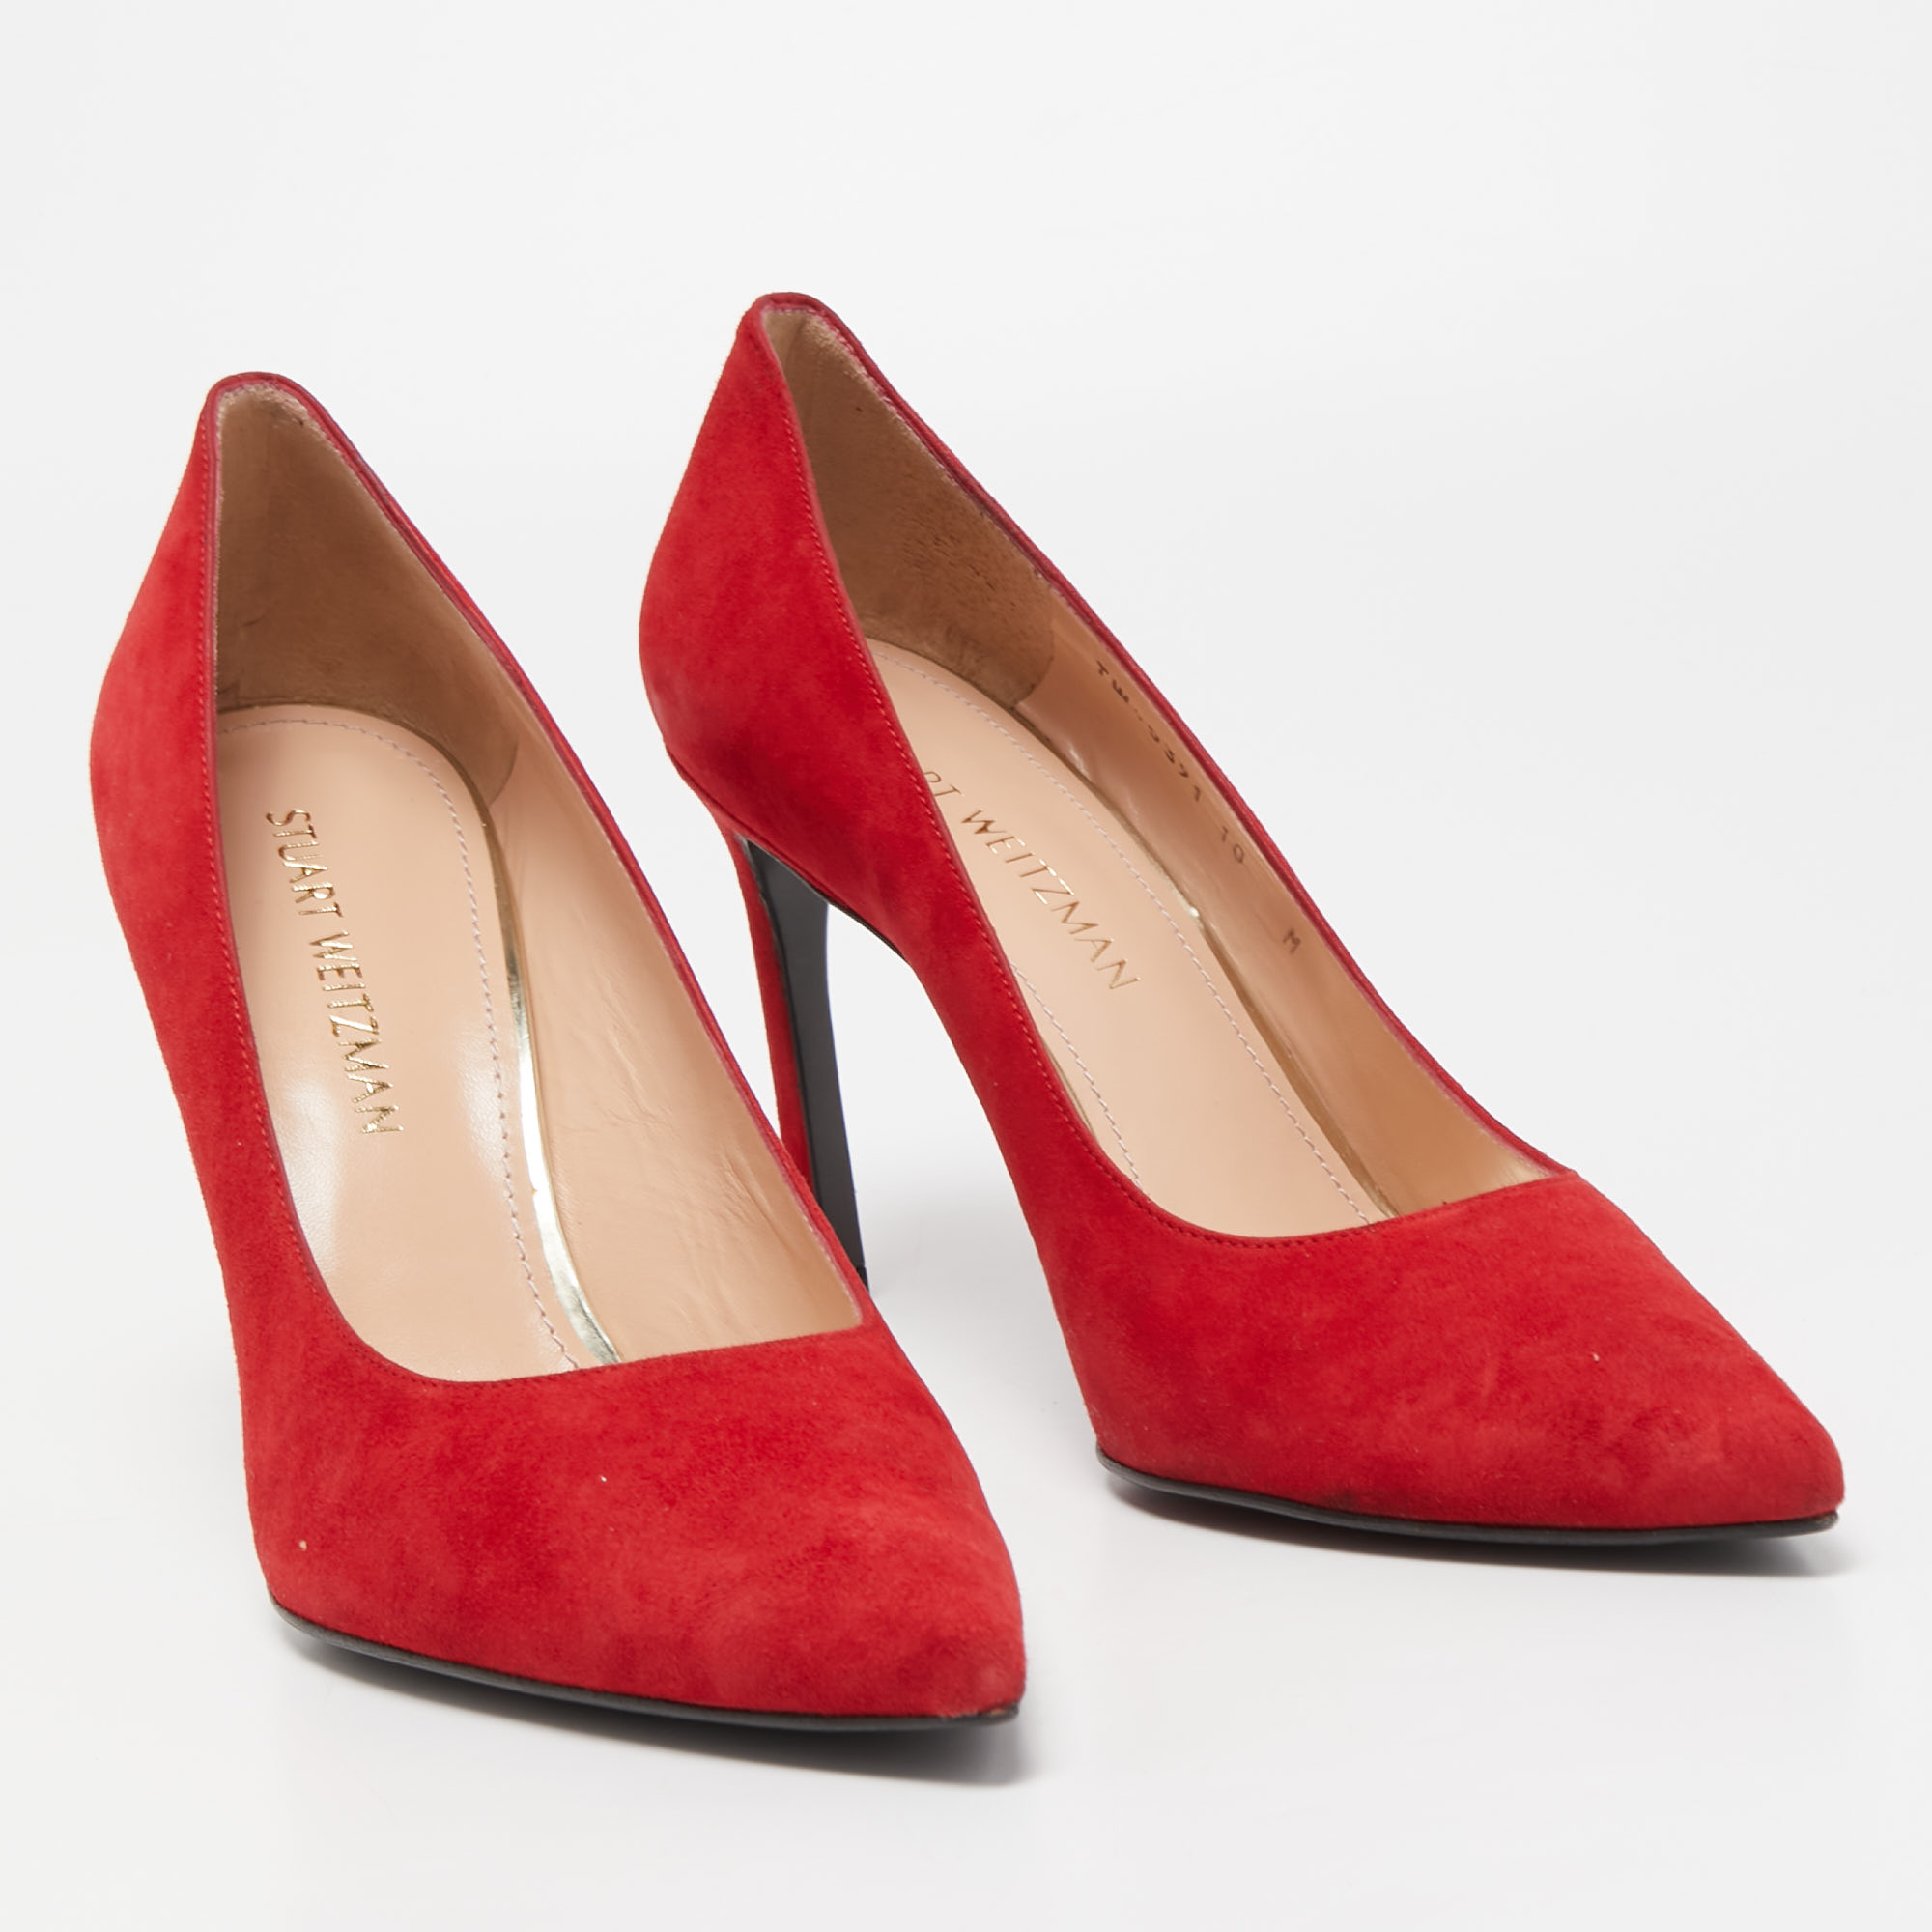 Stuart Weitzman Red Suede Pointed Toe Pumps Size 41